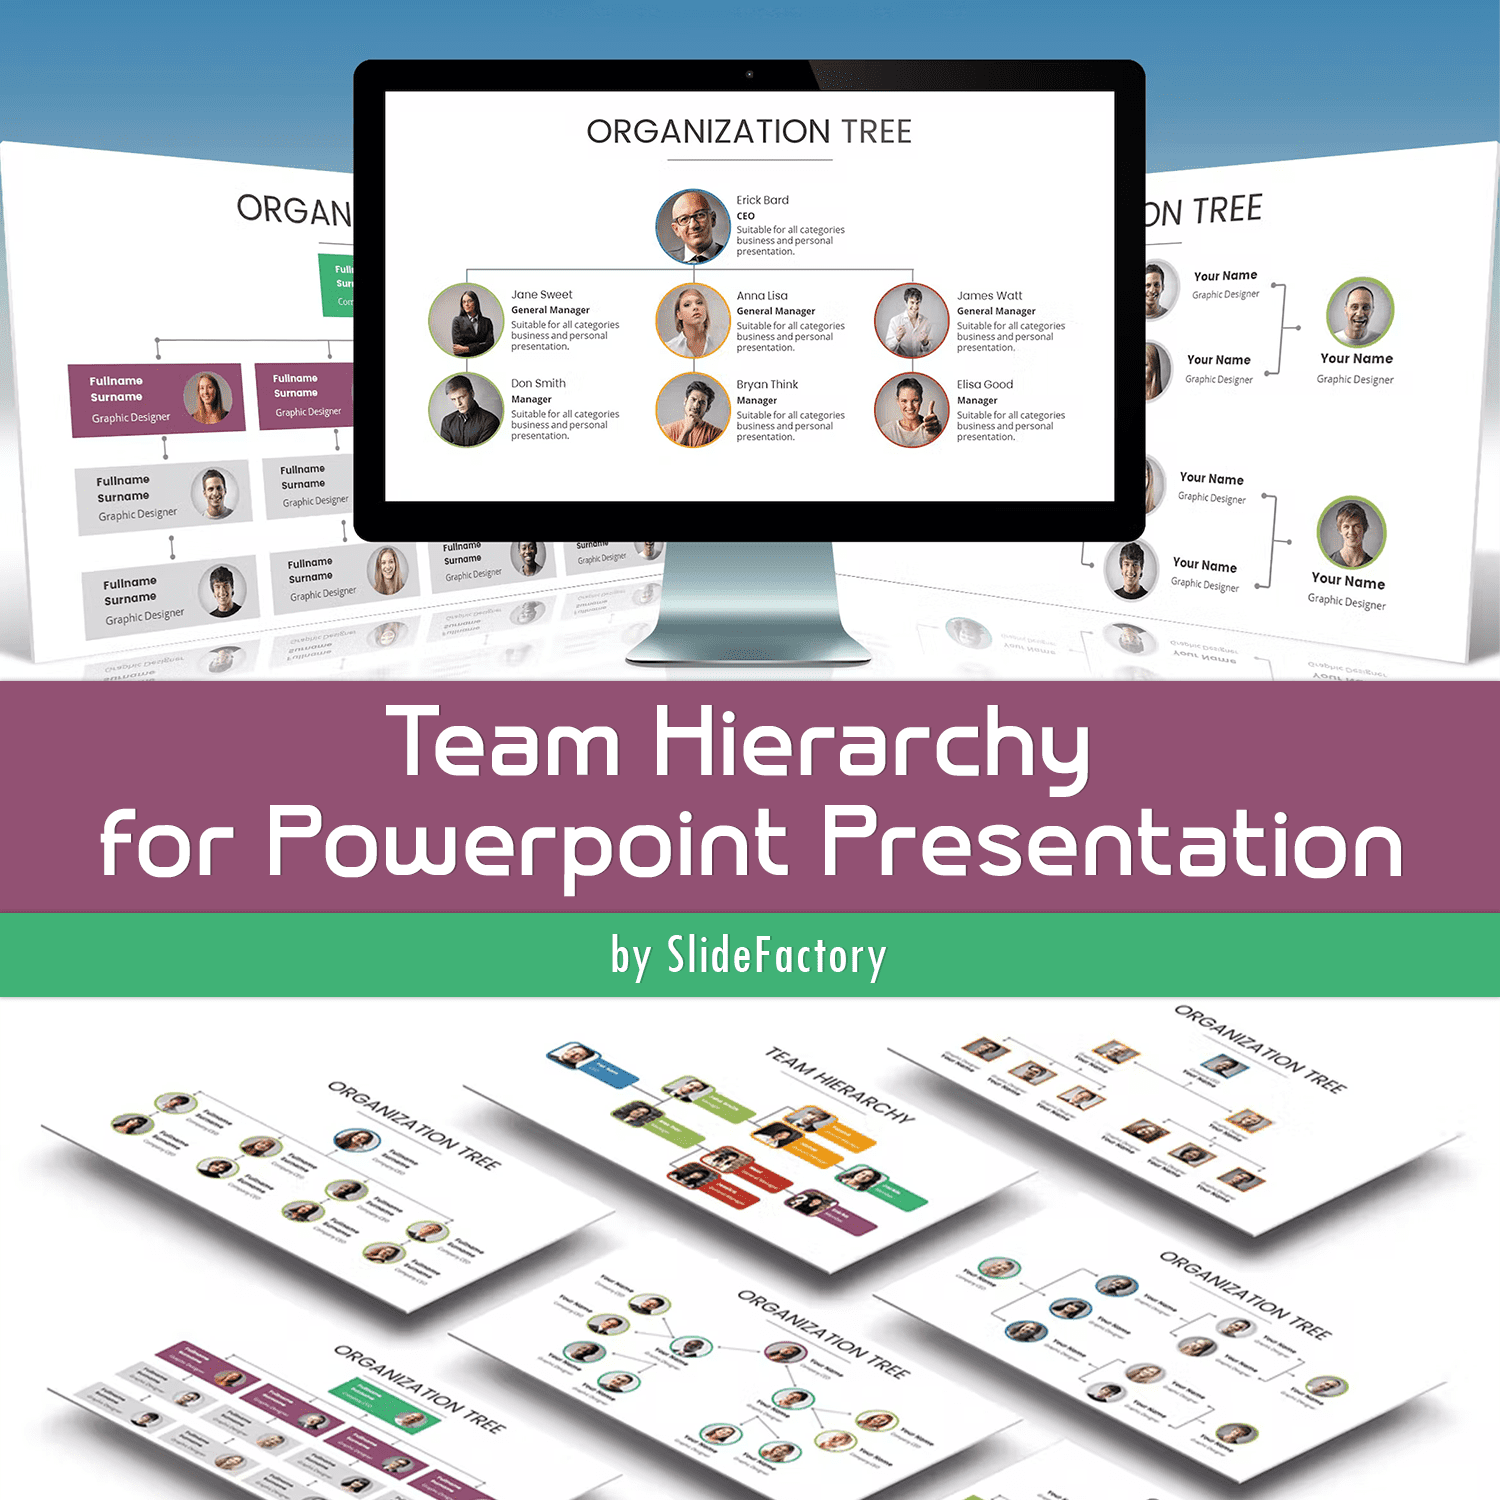 A selection of images of colorful slides of a presentation template on the topic of hierarchy in a team.